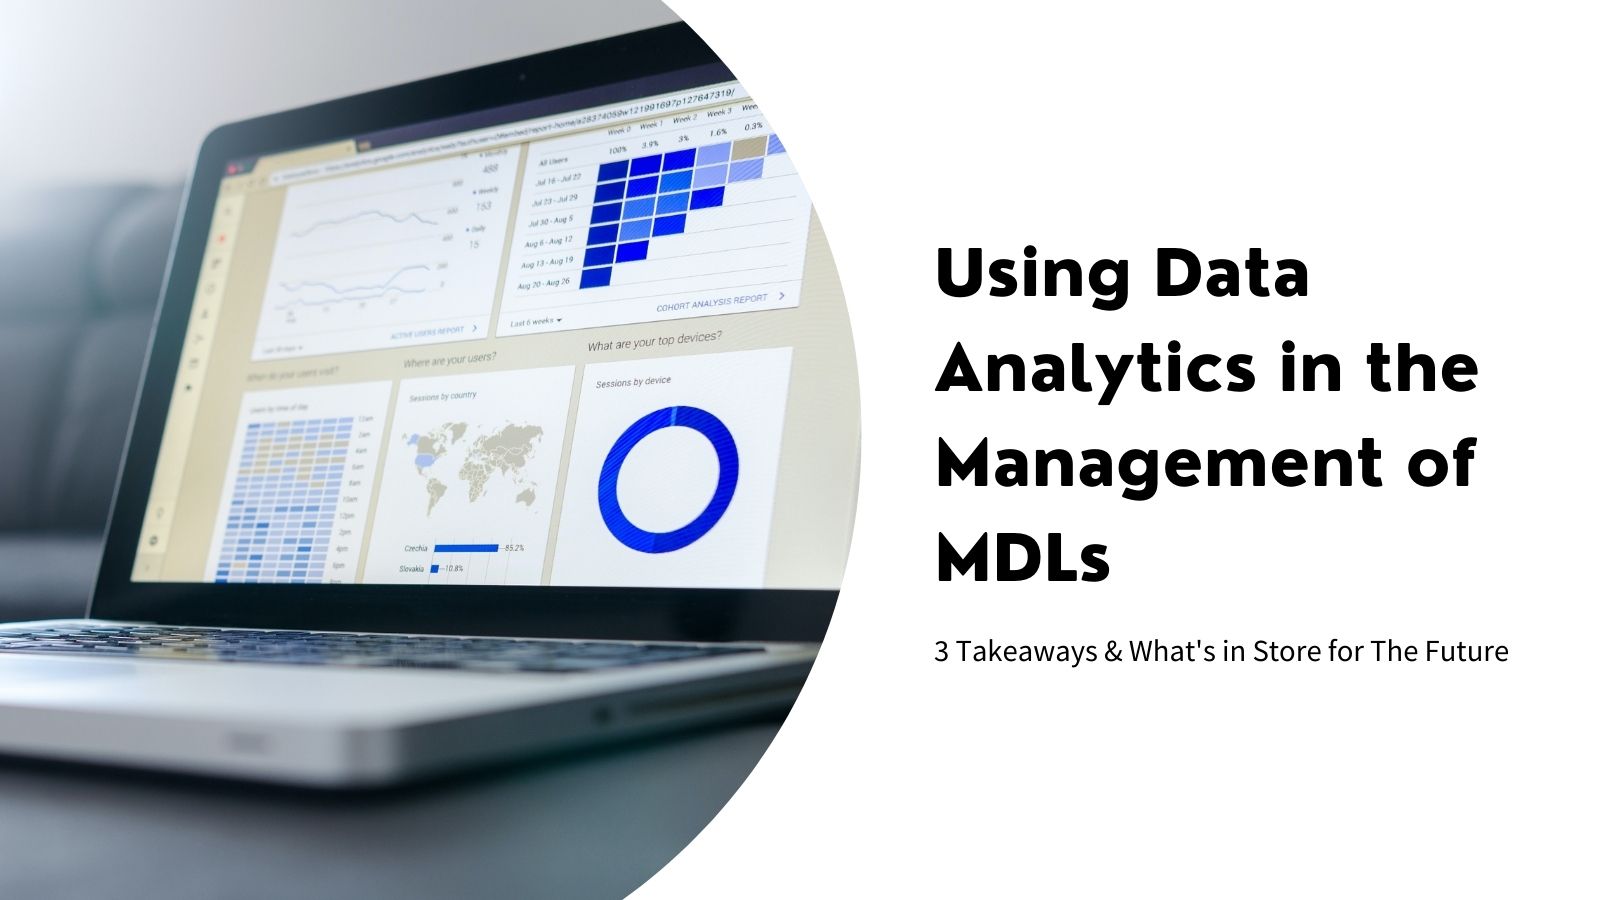 Using Data Analytics in the Management of MDLs